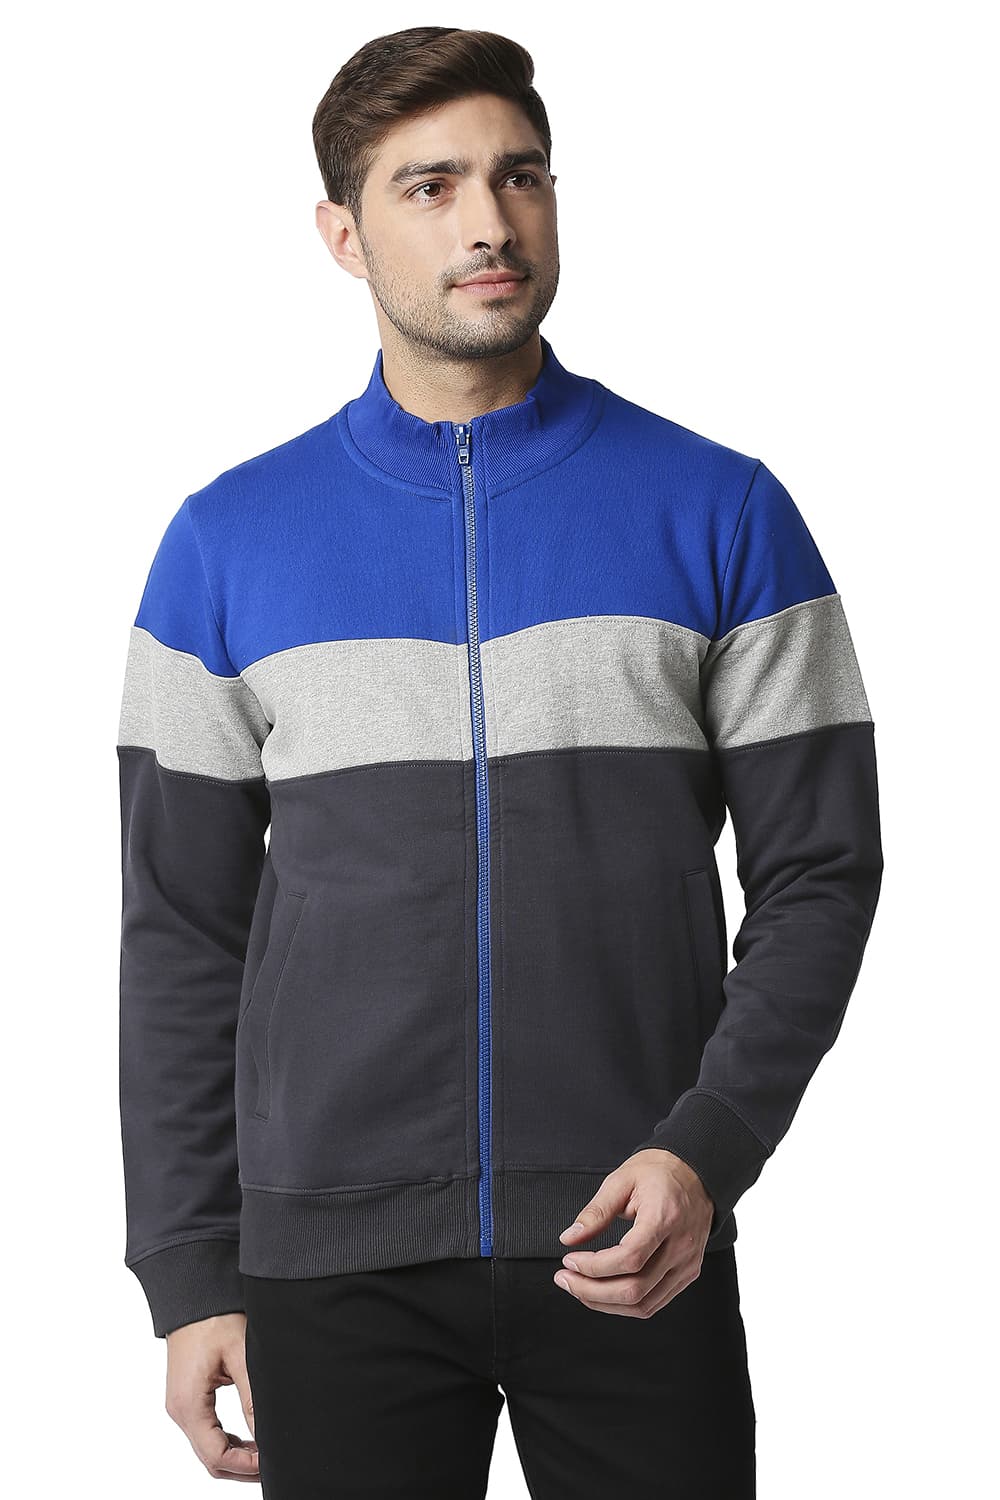 BASICS MUSCLE FIT LOOP KNIT HIGH NECK JACKET